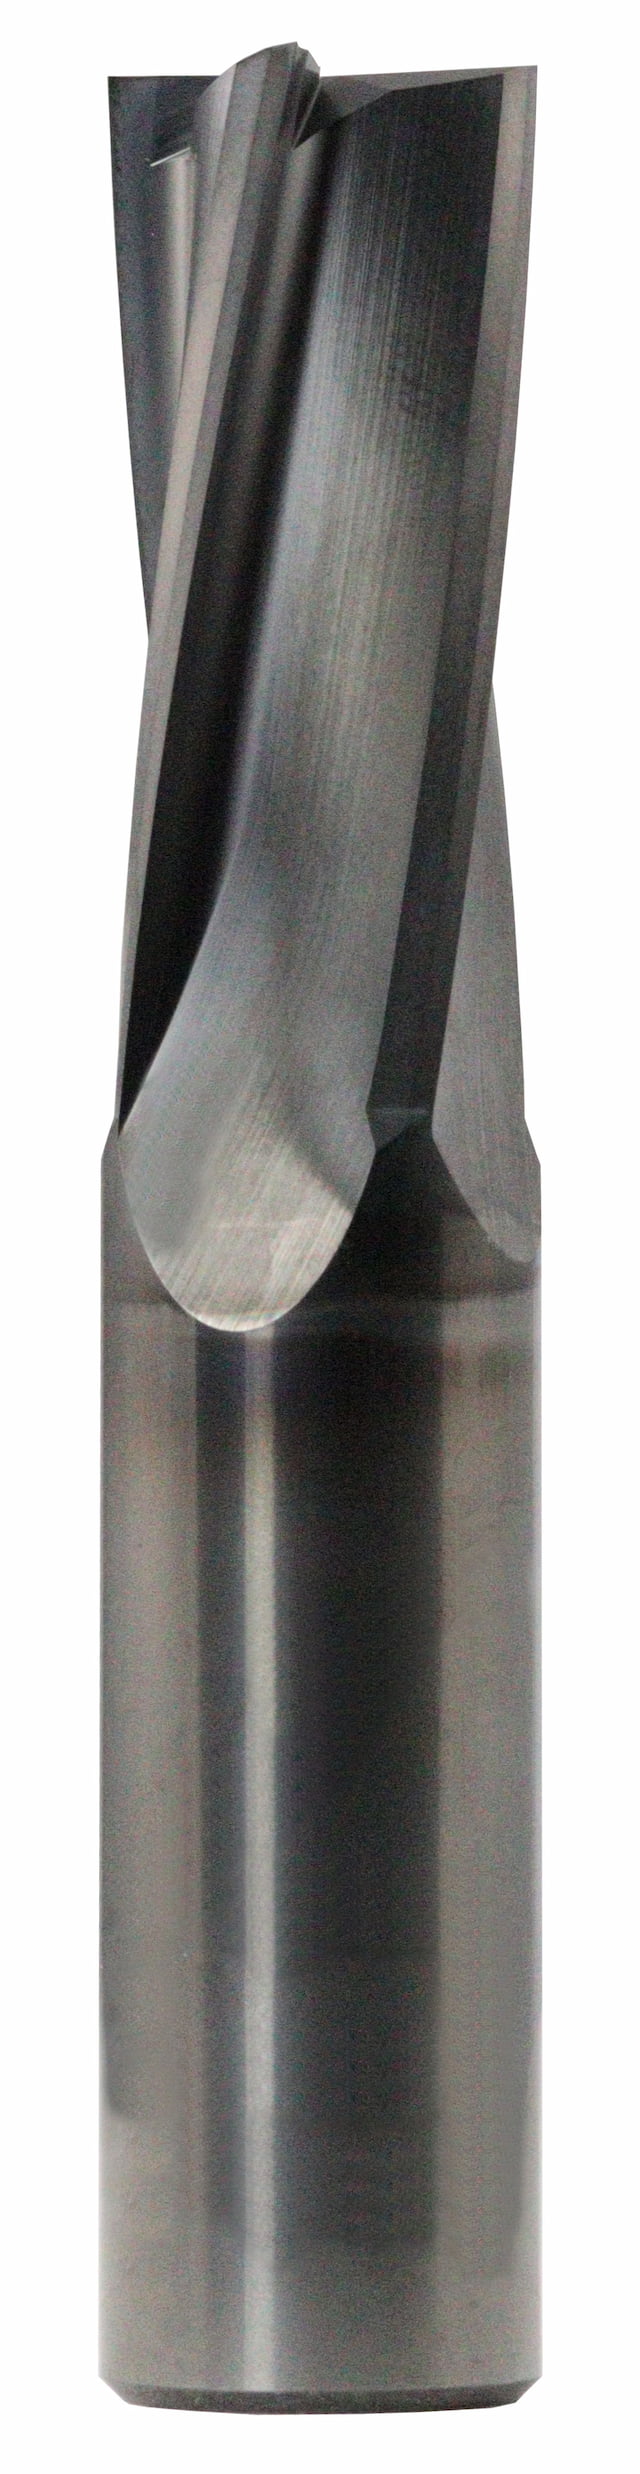 8.00mm Dia, 4 Flute, Square End End Mill - 83058